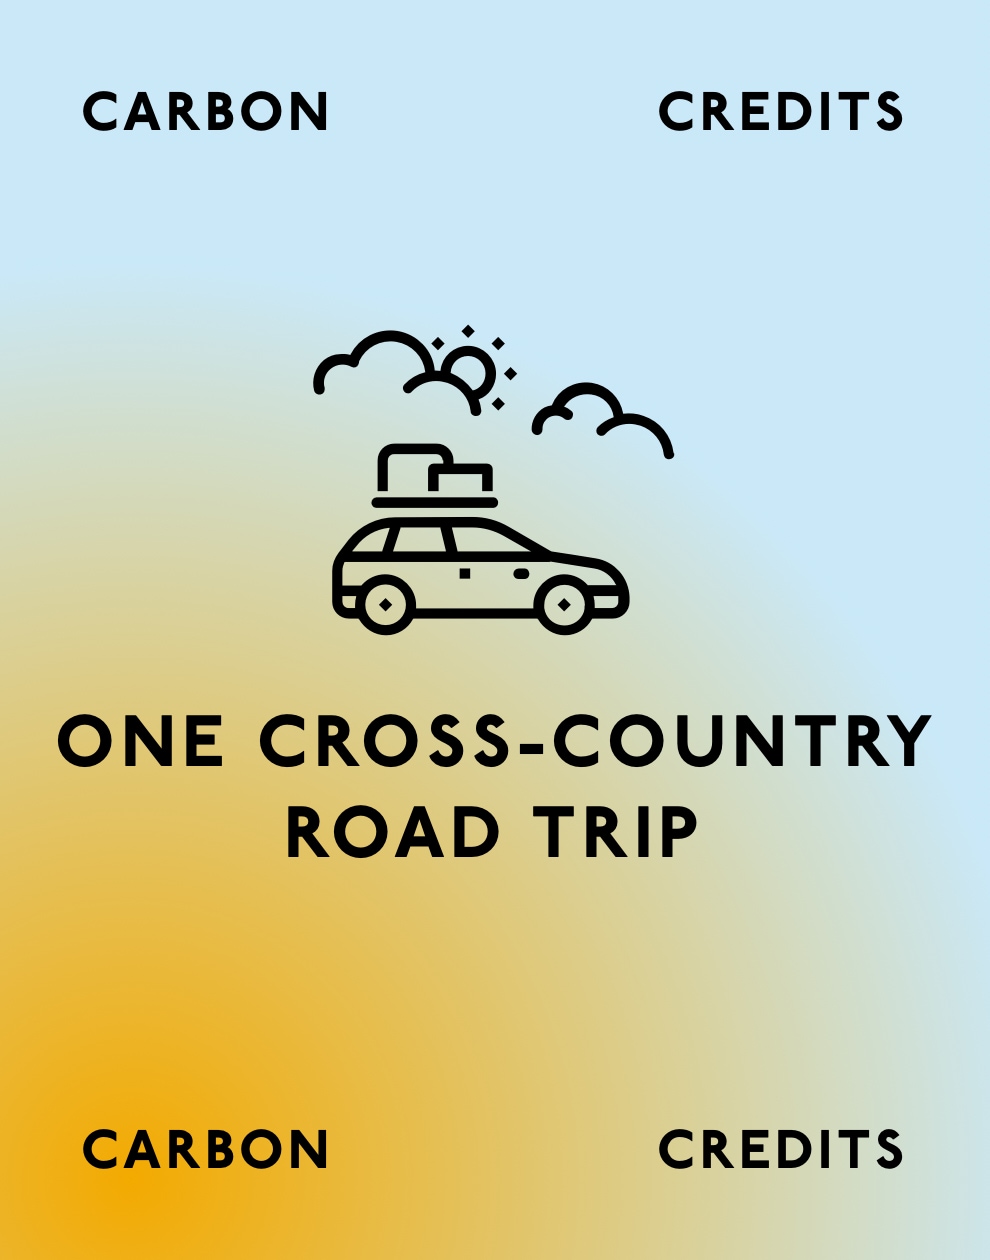 Carbon Credits for a Cross-Country Road Trip